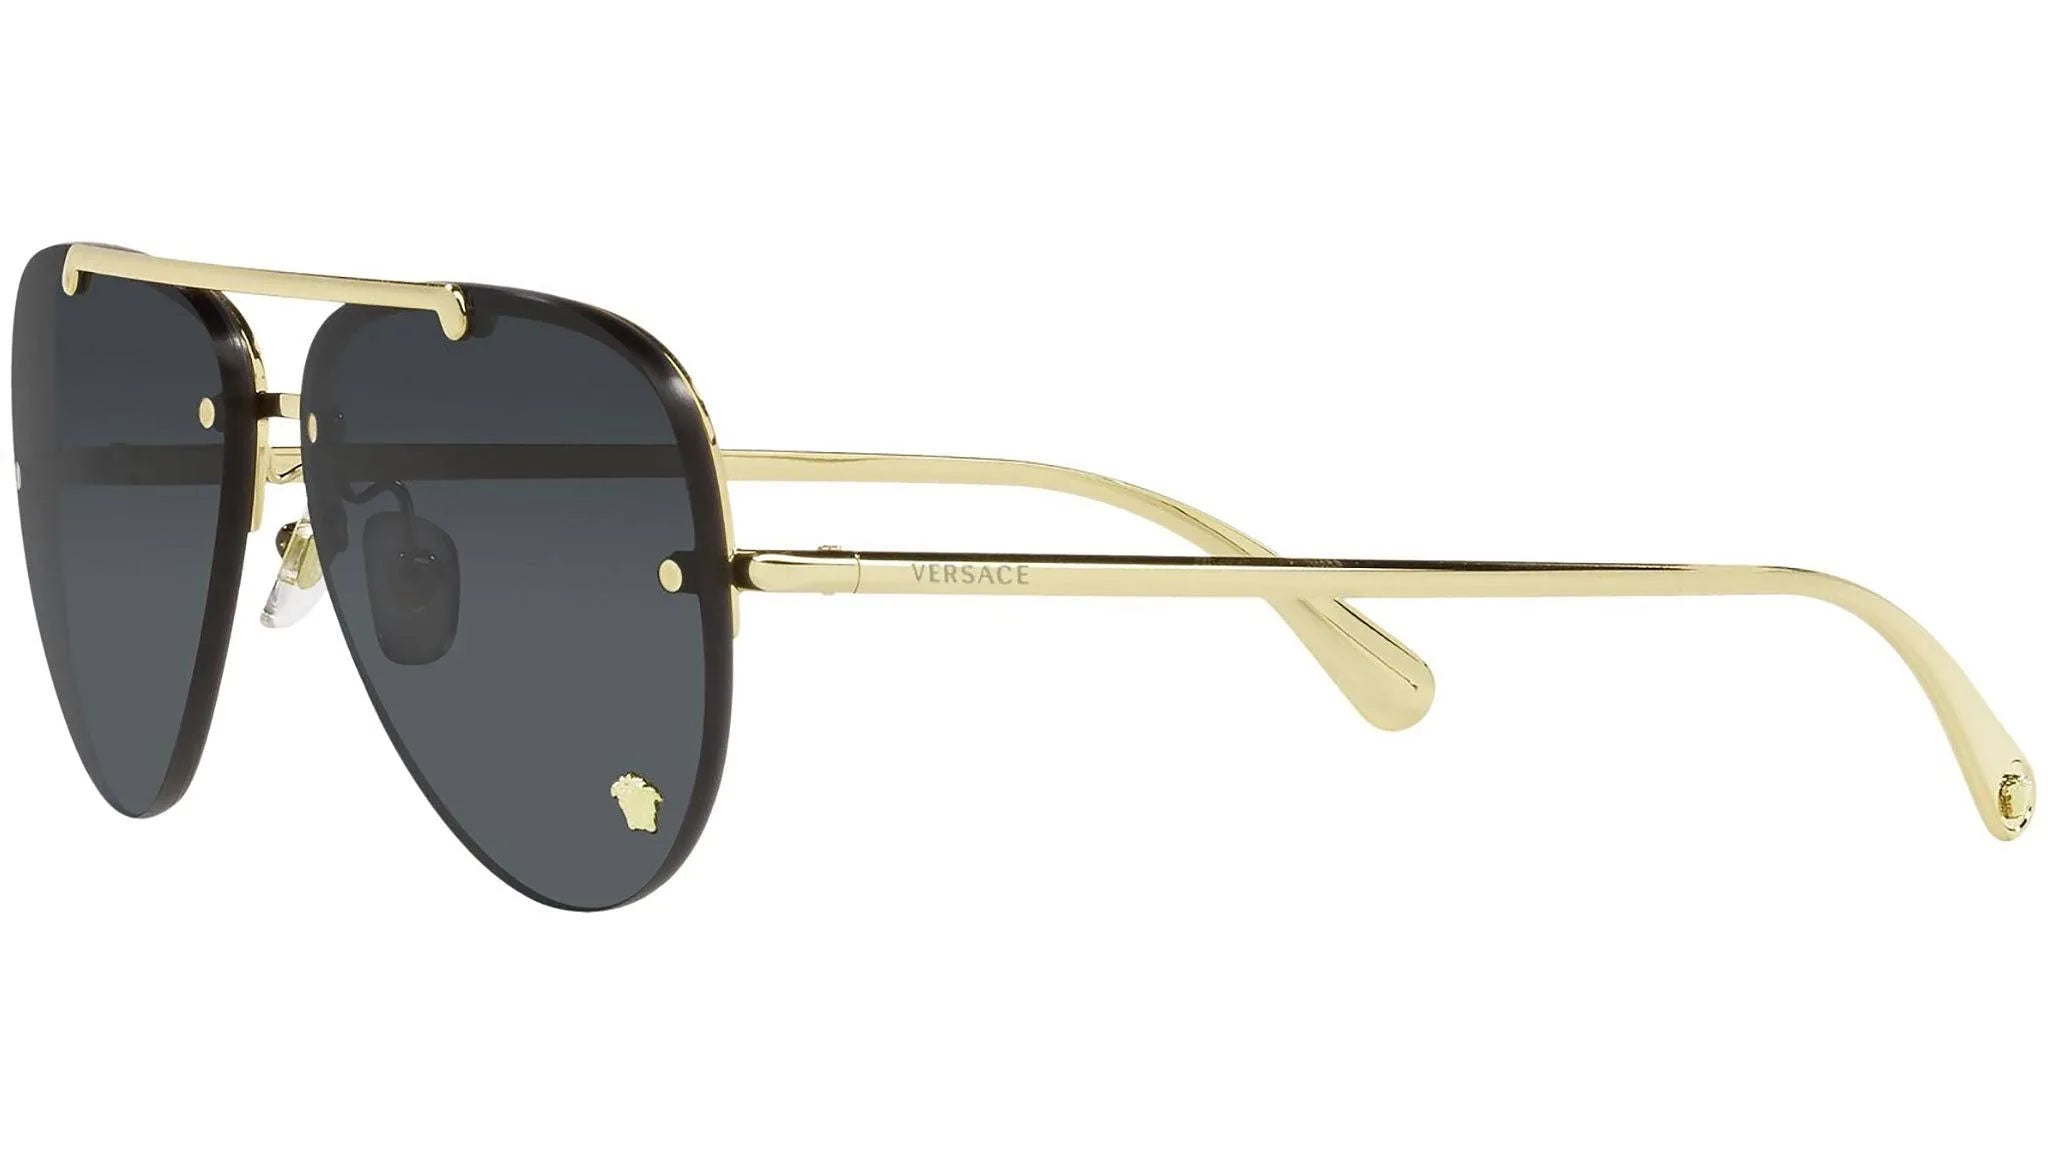 Medusa Glam Pilot Sunglasses IN-STORE PURCHASE ONLY